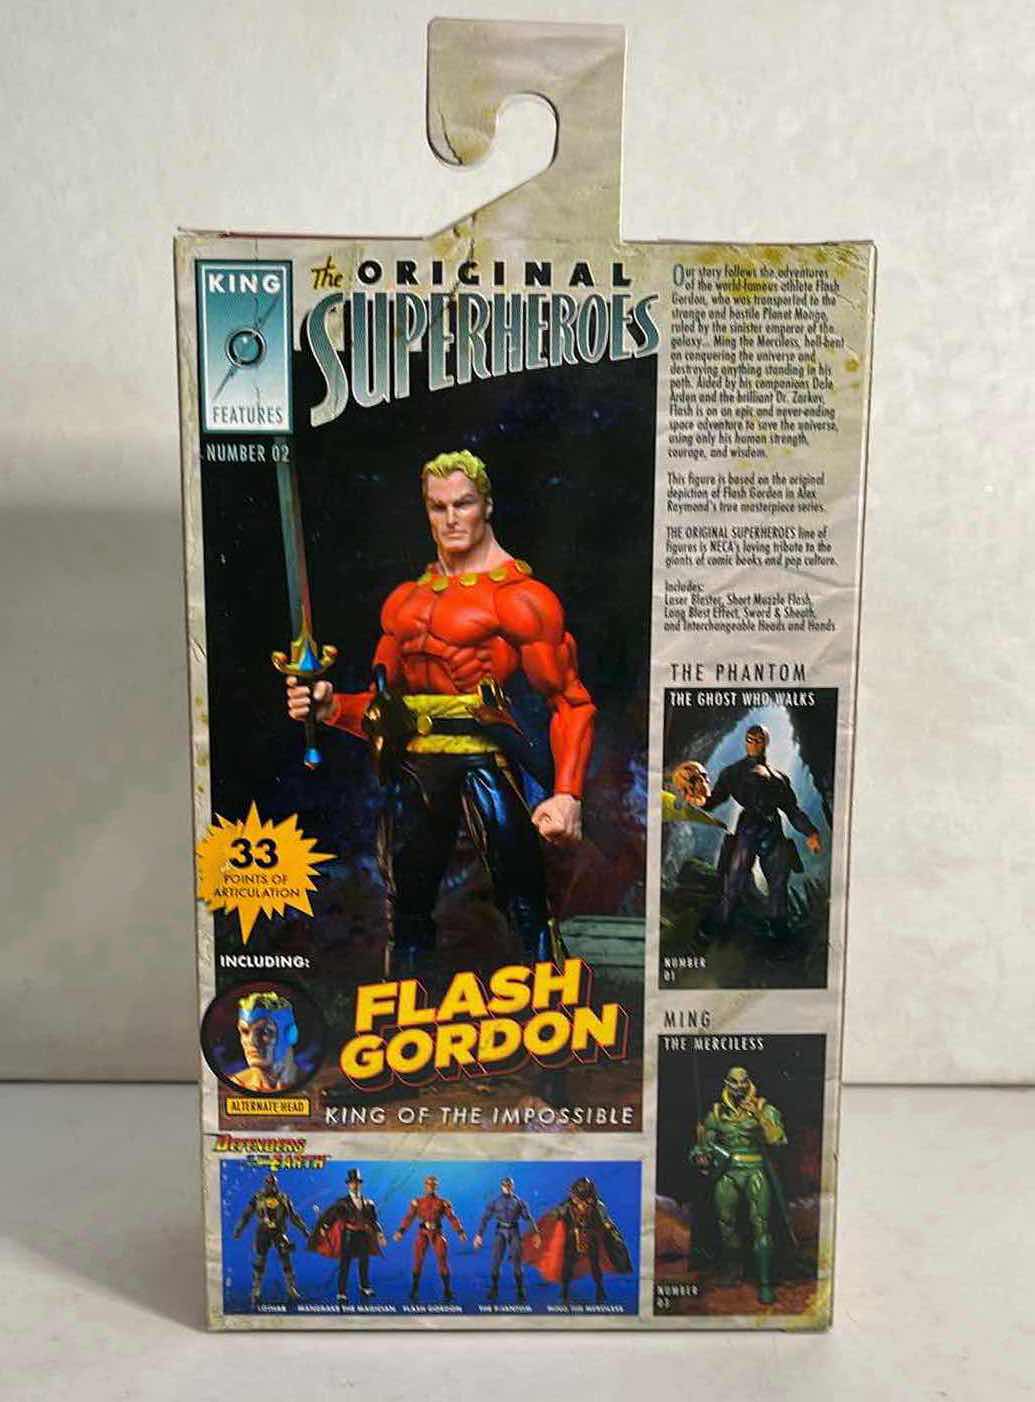 Photo 1 of NIB ORIGINAL SUPERHEROES KING FEATURES “KING OF THE IMPOSSIBLE ” ACTION FIGURE - RETAIL PRICE $34.99